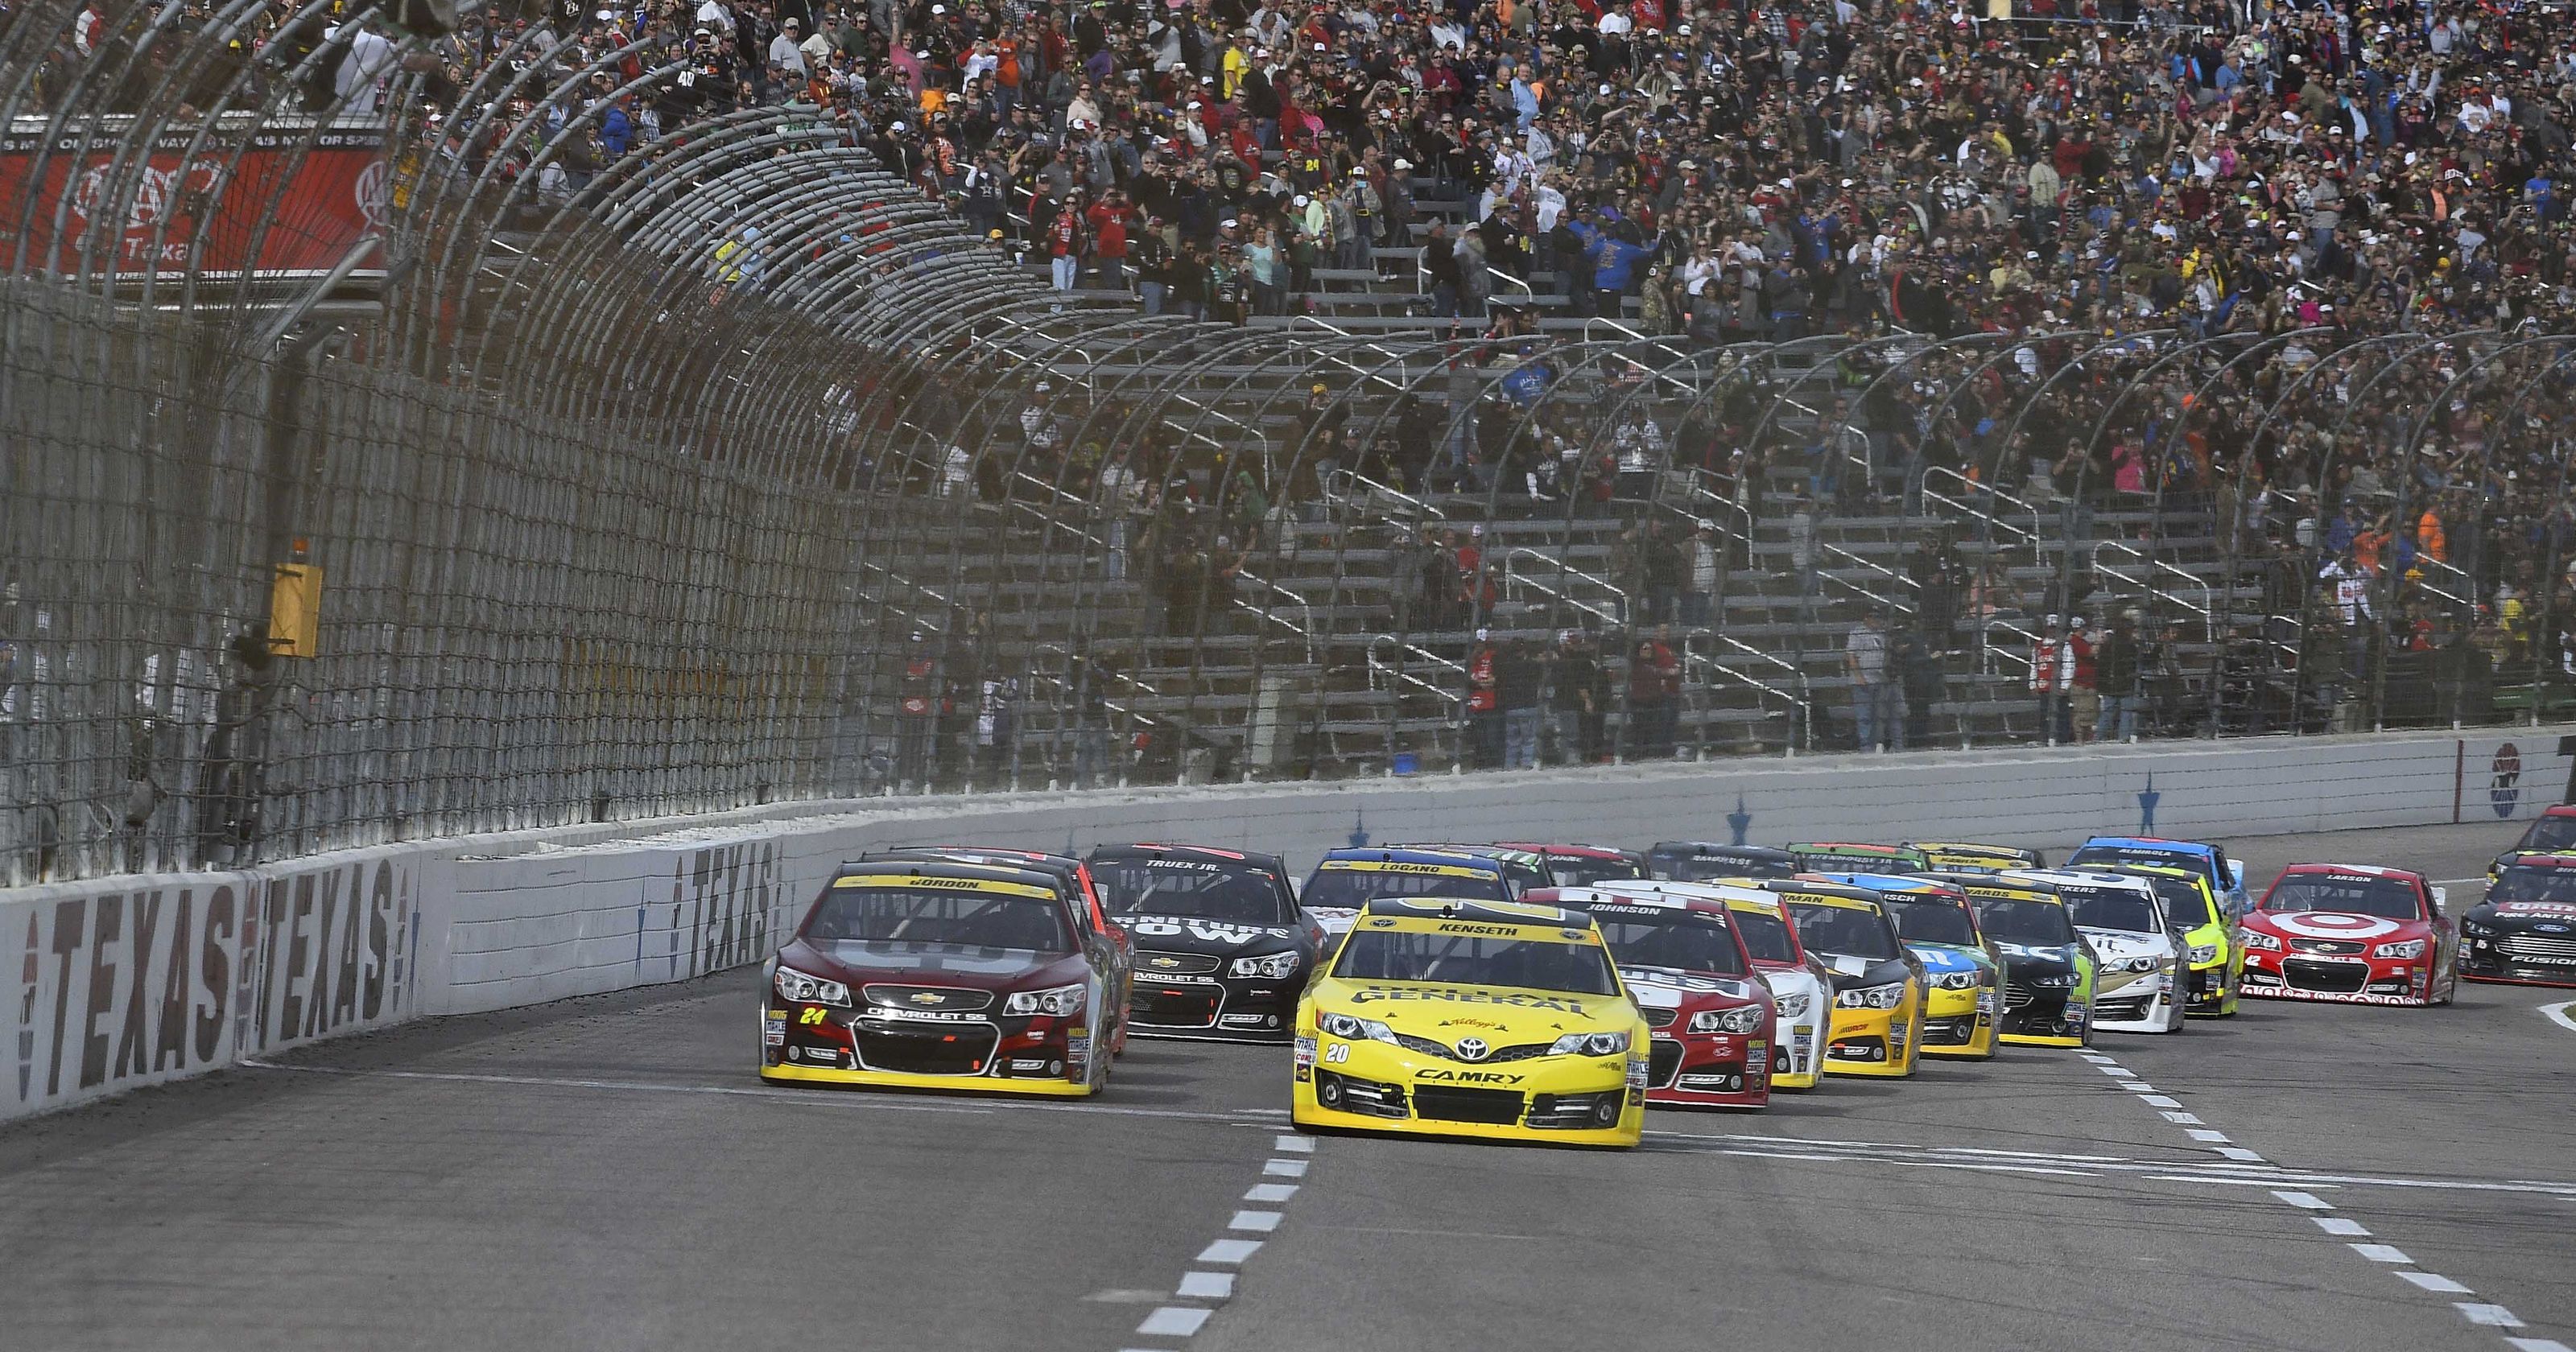 NASCAR at Texas Motor Speedway: Start time, lineup for tonight's race